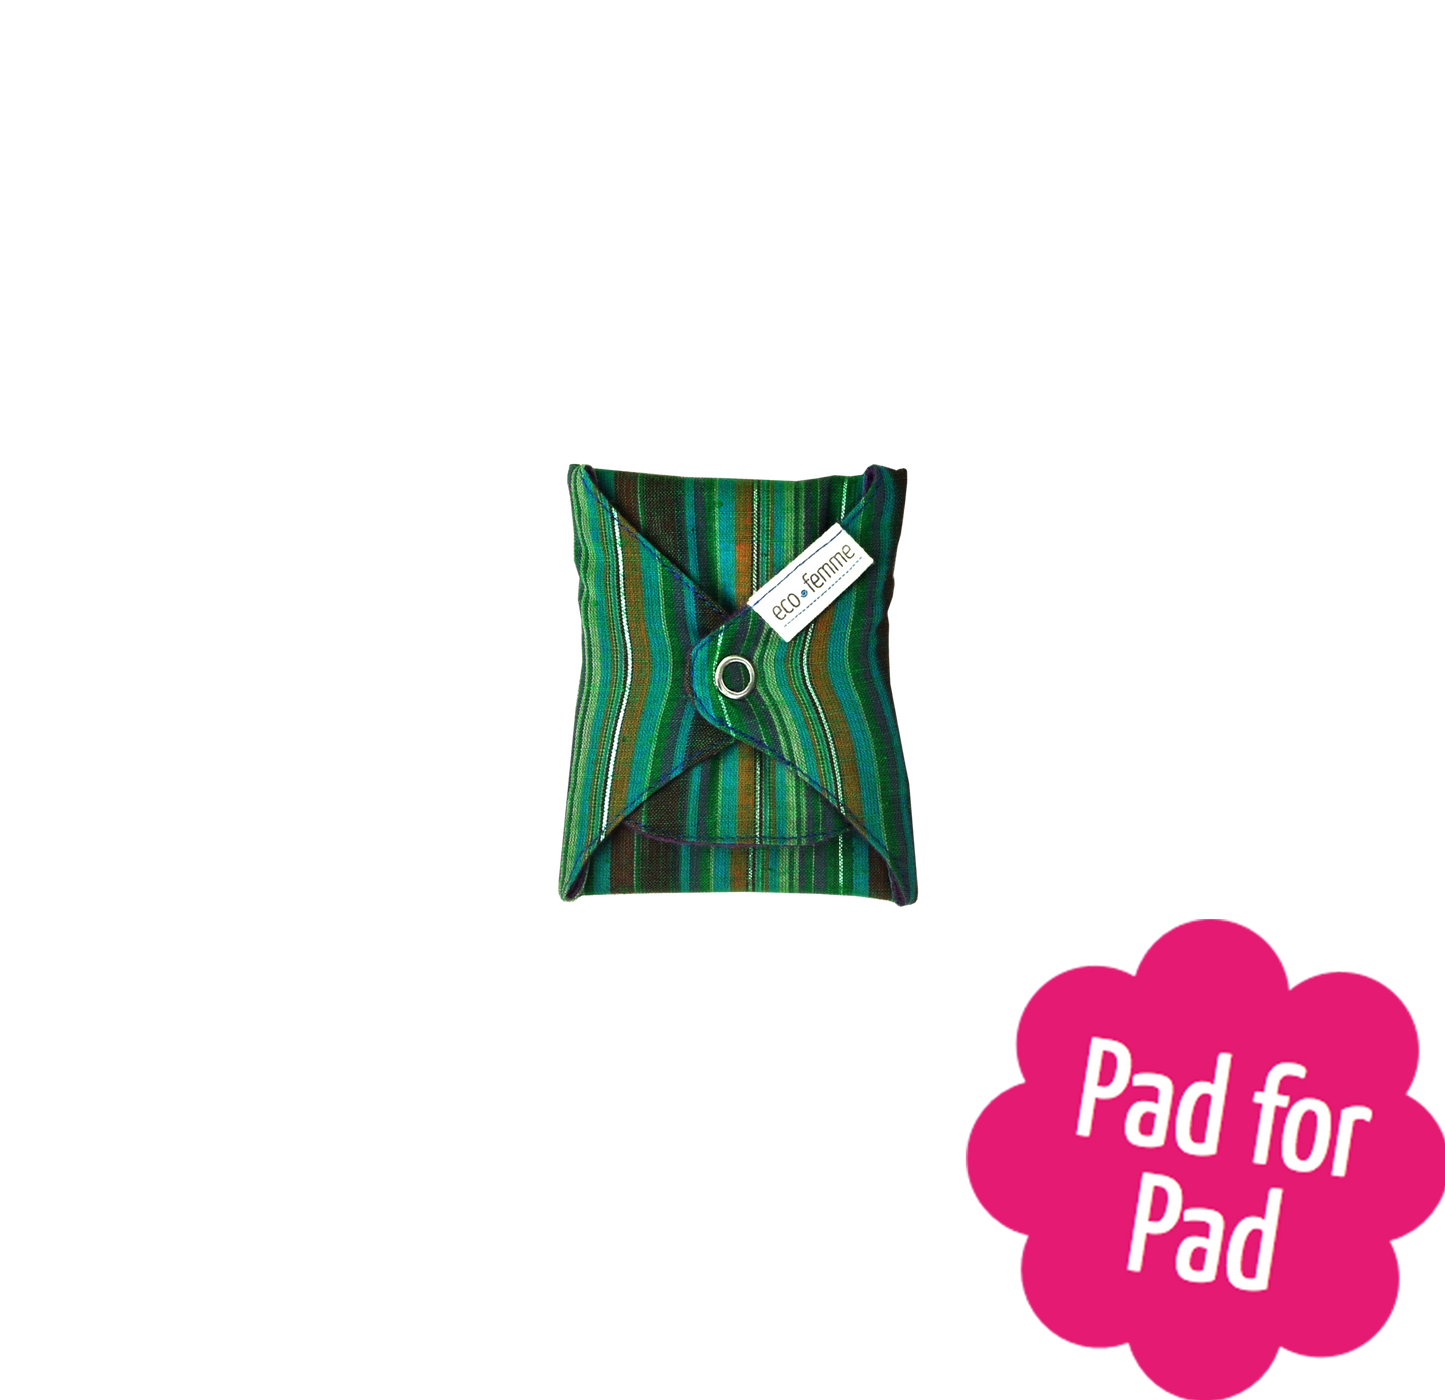 Reusable and eco-friendly menstrual pad, providing extra comfort and sustainable period care